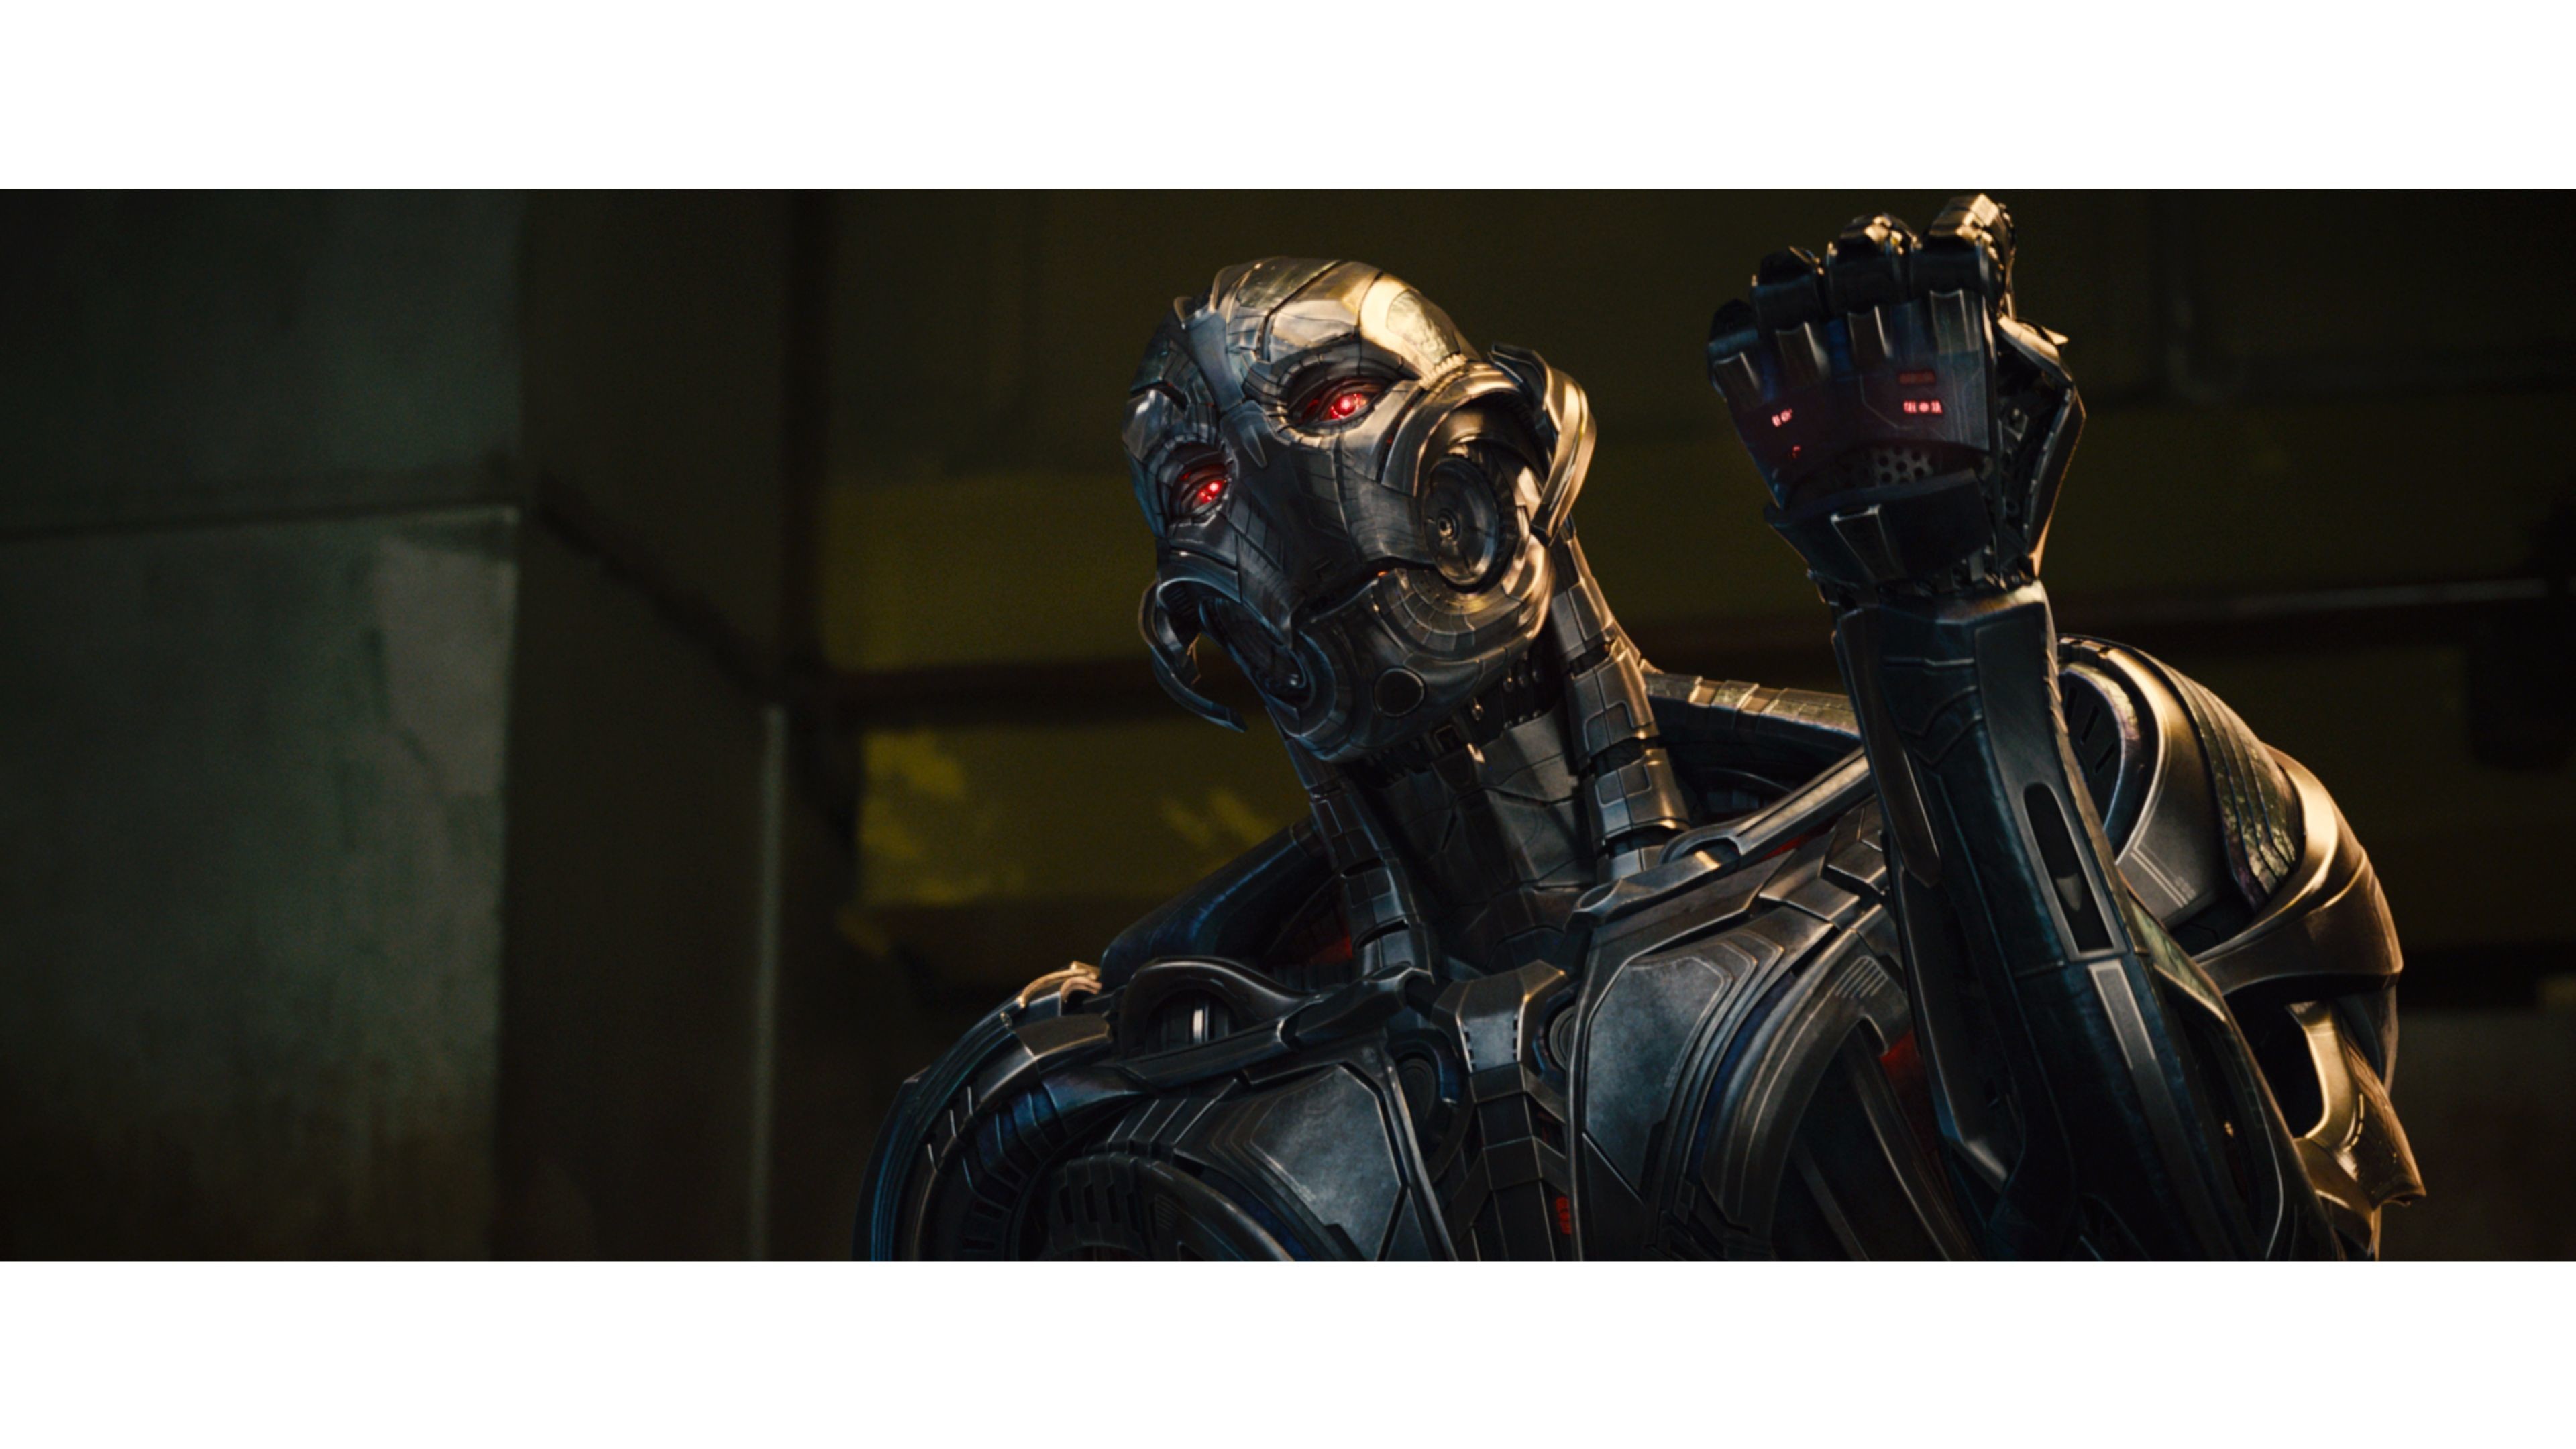 3840x2160 Avengers Age of Ultron Wallpaper Download